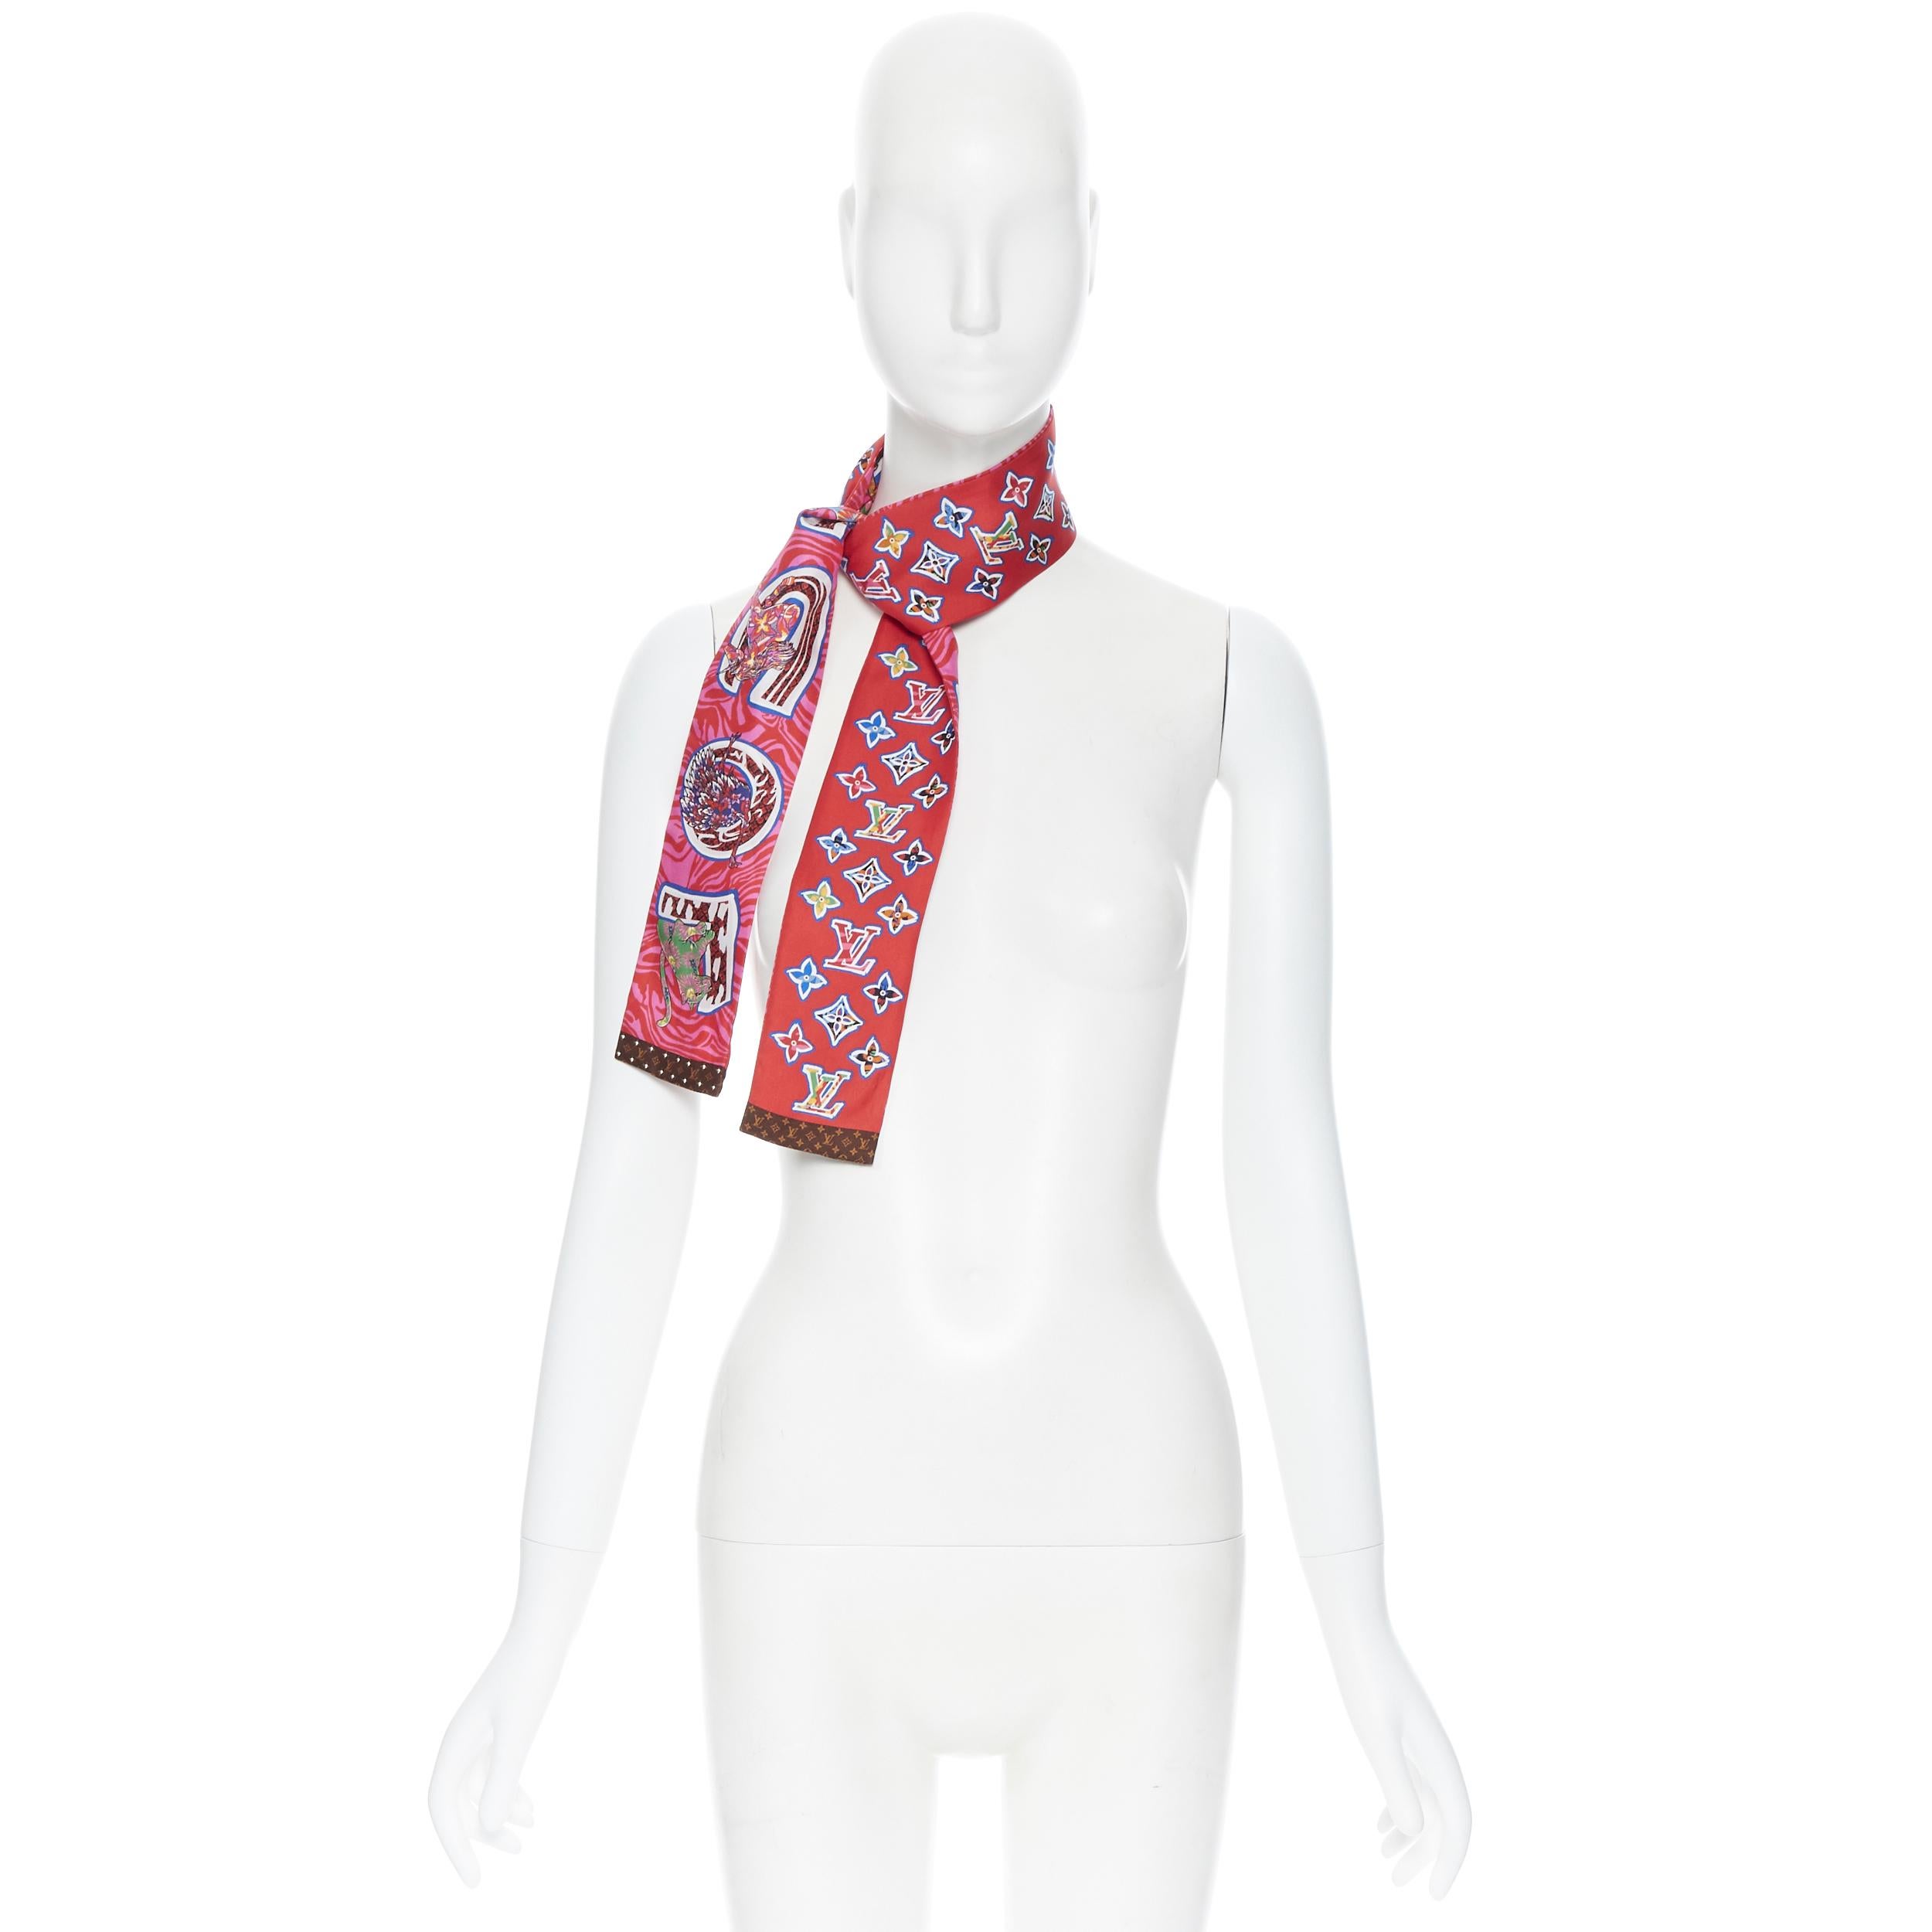 LOUIS VUITTON 100% silk red monogram animal print studded twilly neck scarf 
Brand: Louis Vuitton
Model Name / Style: Twilly scarf
Material: Silk
Color: Red
Pattern: Floral
Extra Detail: Twilly scarf. Studded ends.
Made in: Italy

CONDITION: